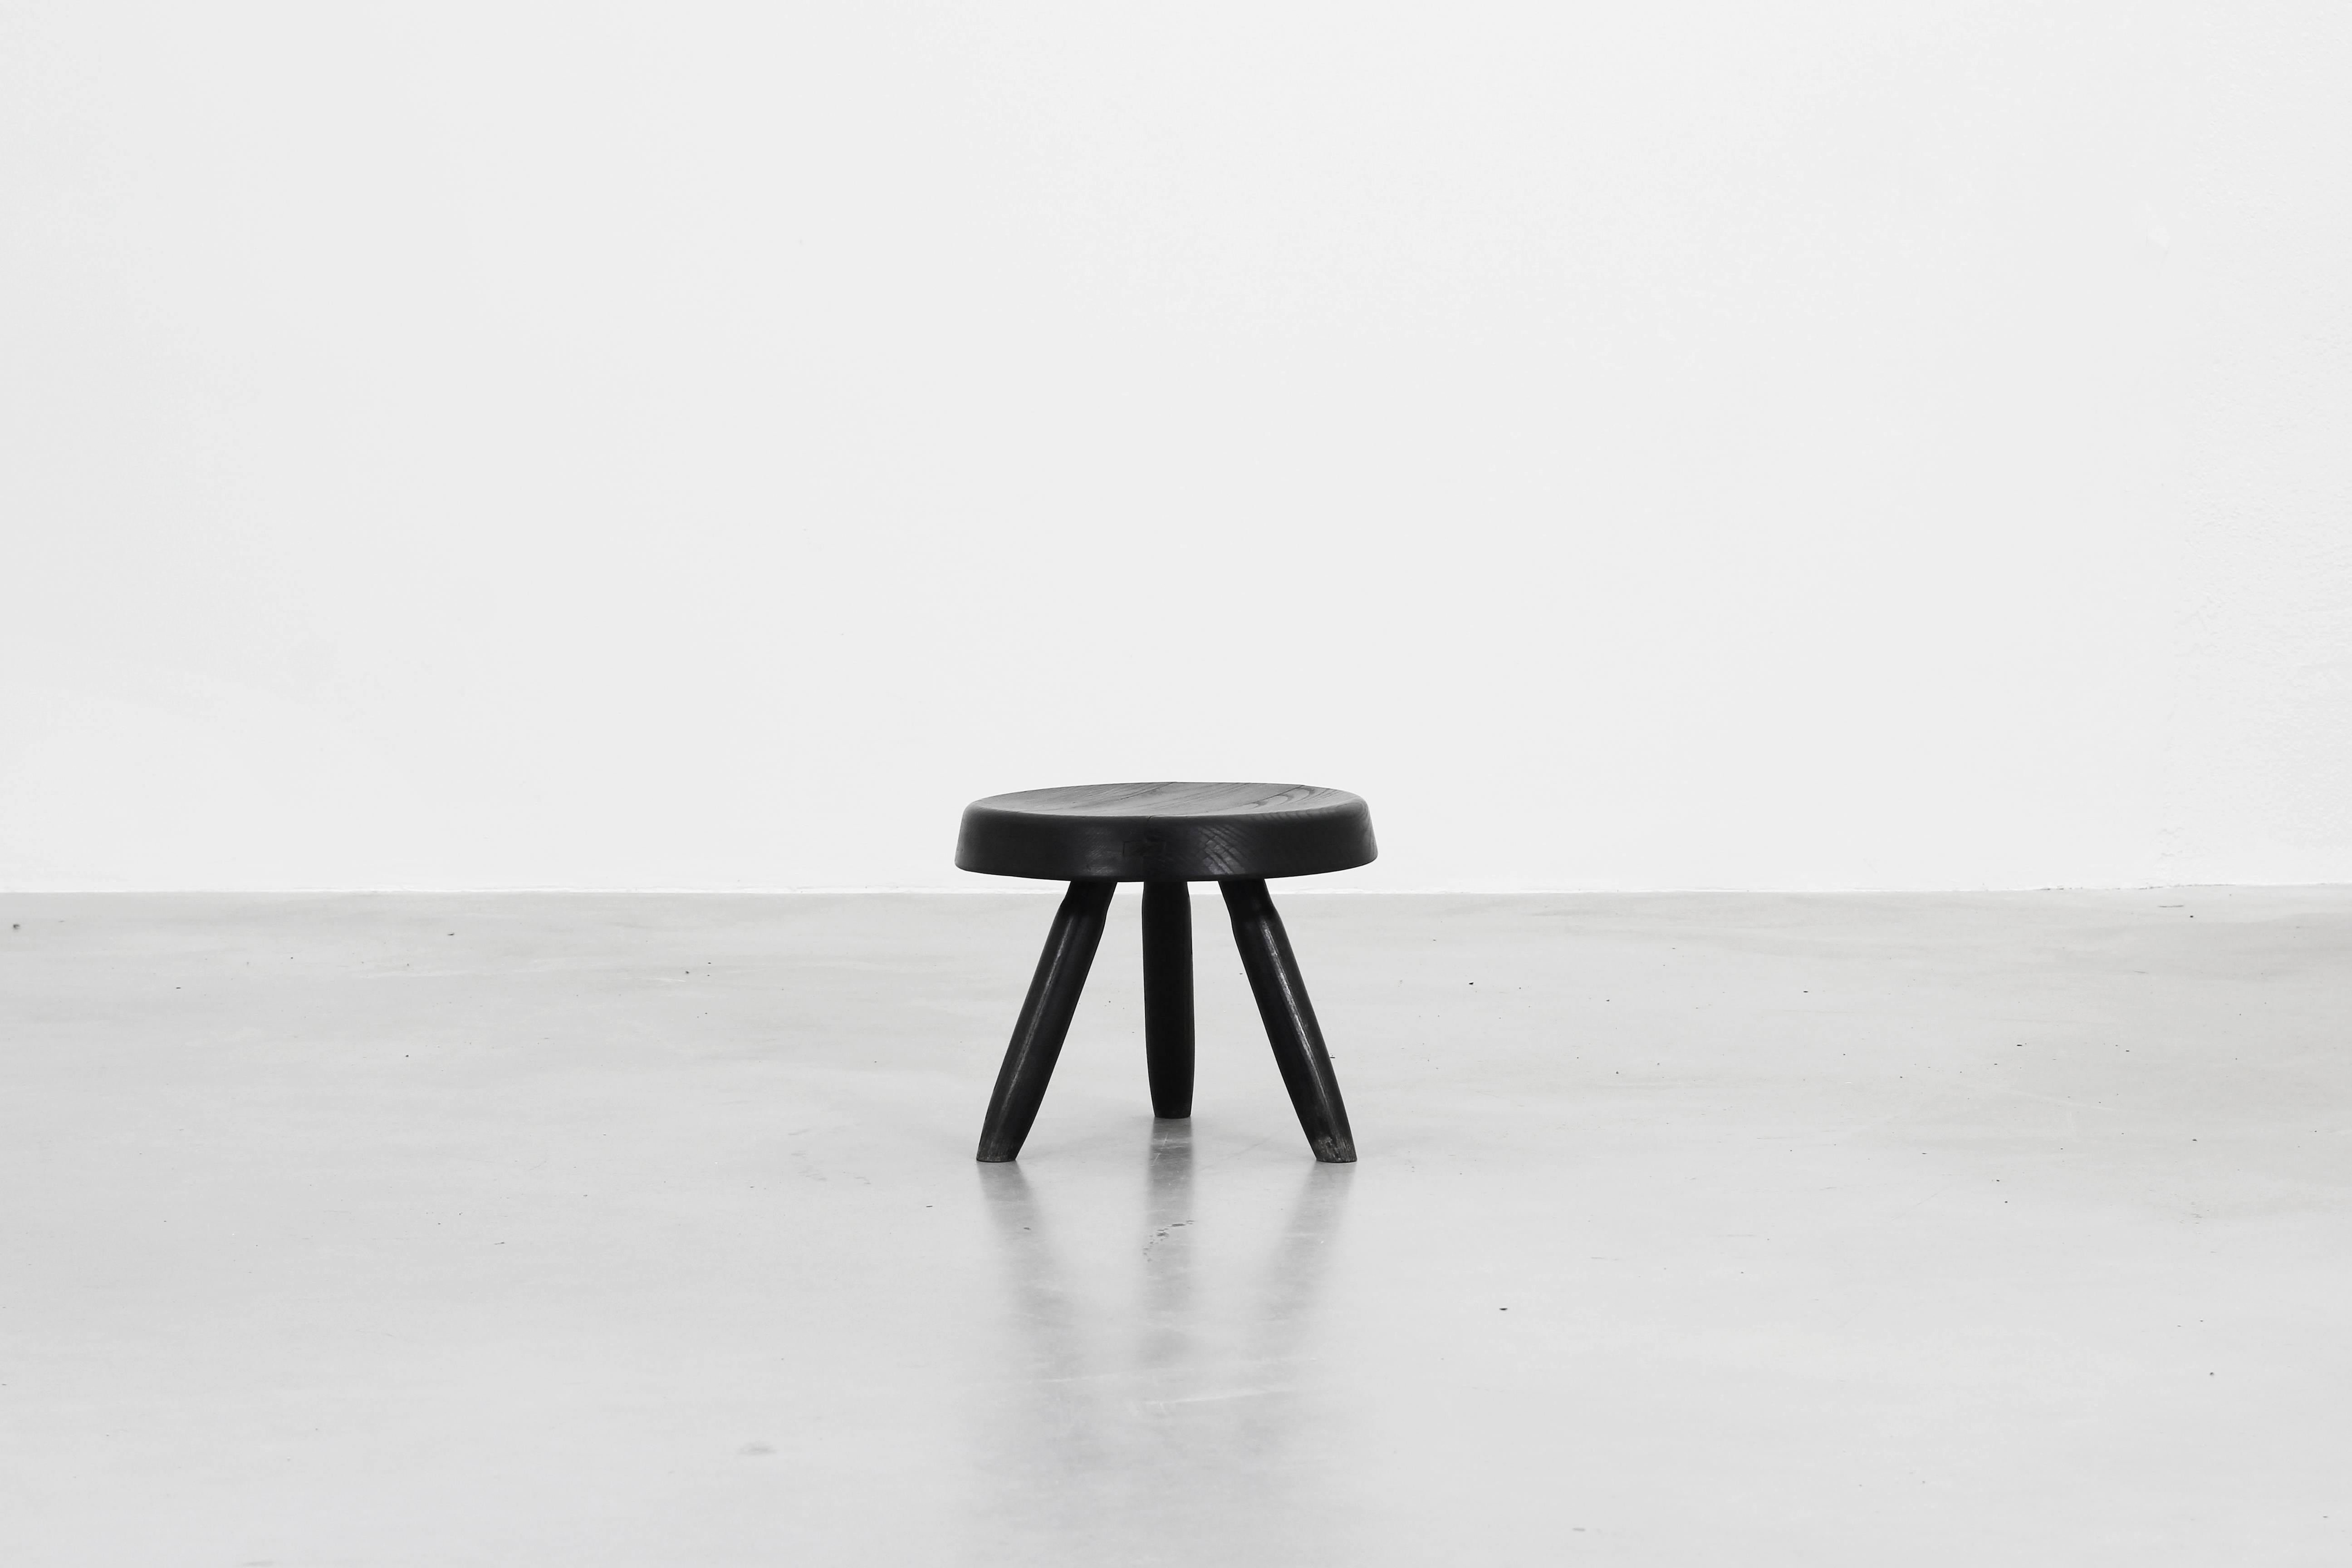 Very beautiful little stool designed by Charlotte Perriand in black lacquered ashwood, beautiful patina on the legs and on the seat. Manufactured by Steph Simon.